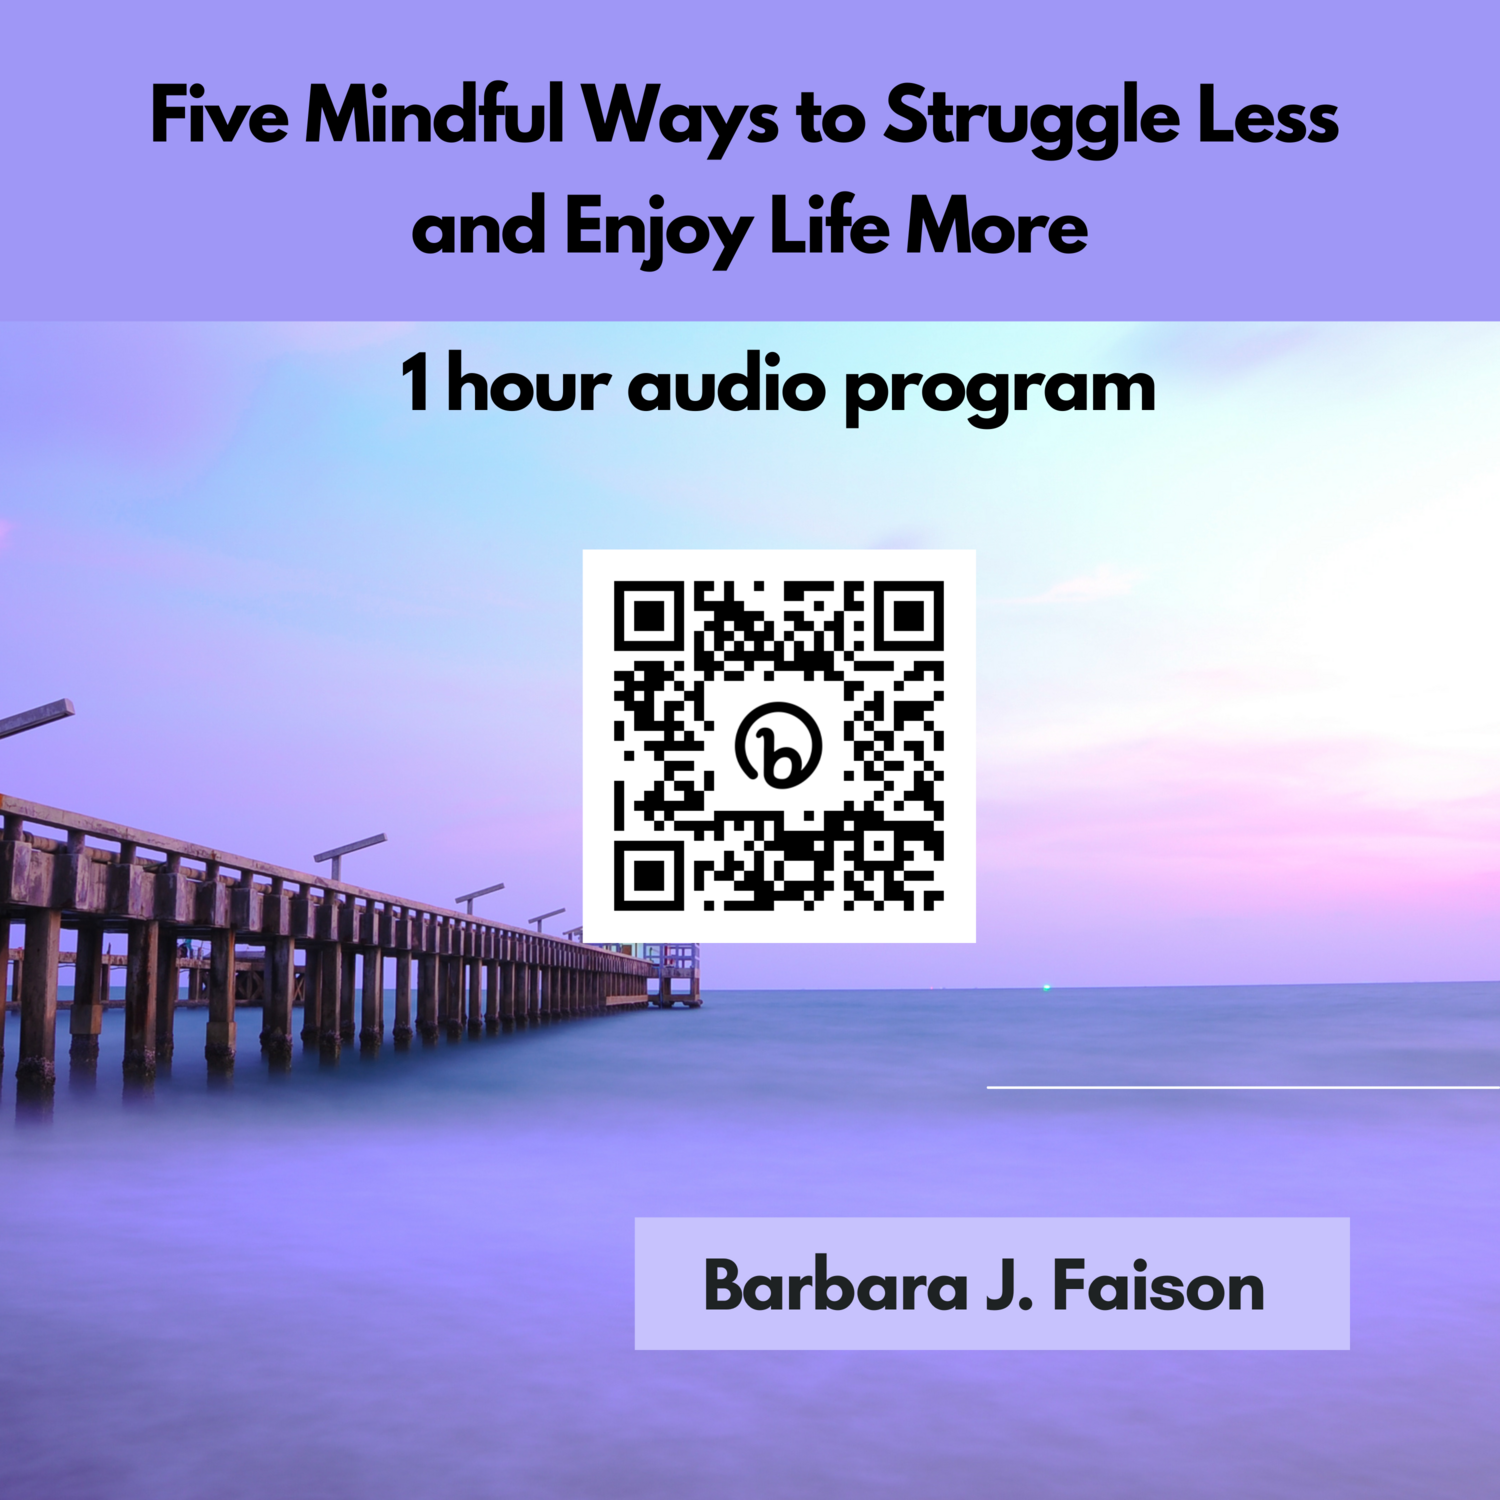 Five Mindful Ways to Struggle Less and Enjoy Life More (1 hr audio
course)